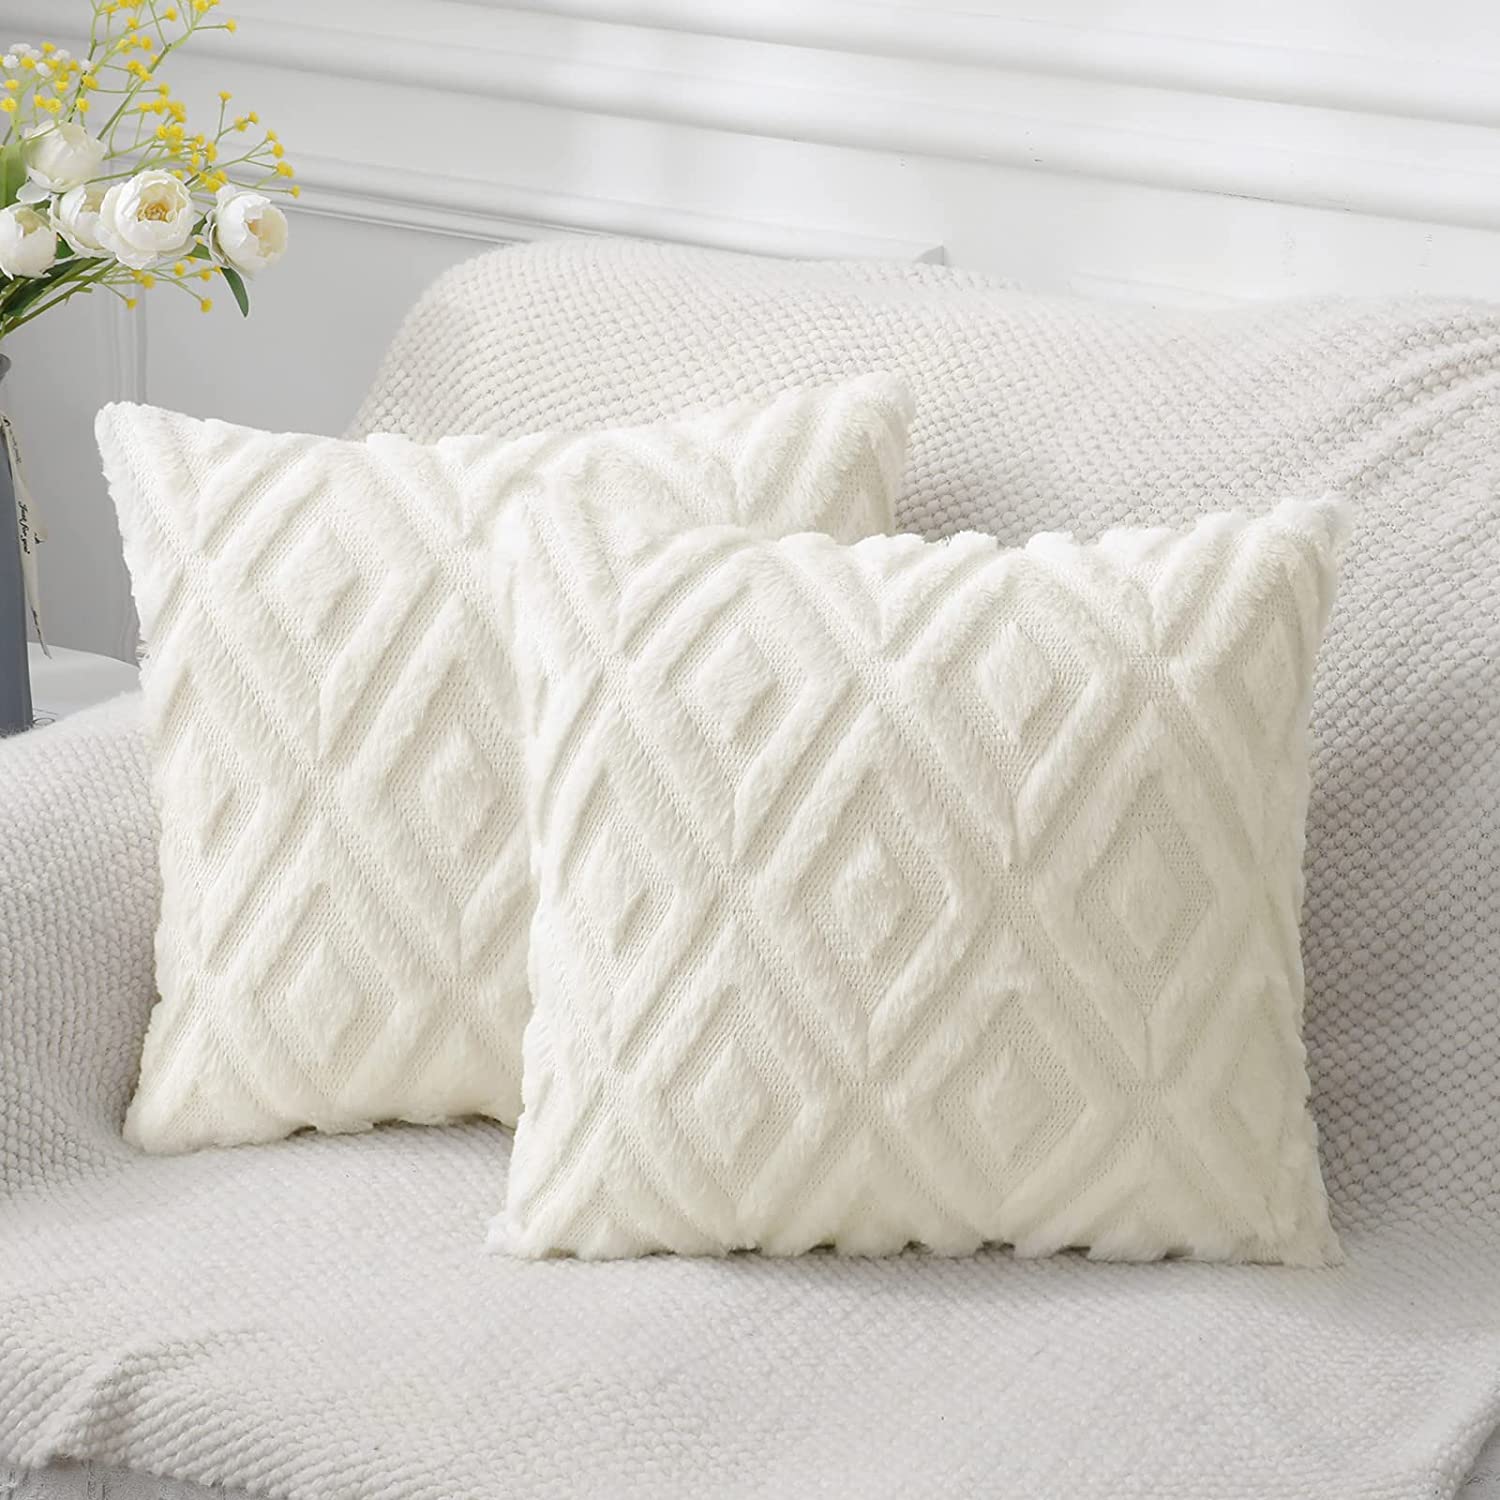 Throw Pillow Covers WholeSale - Price List, Bulk Buy at